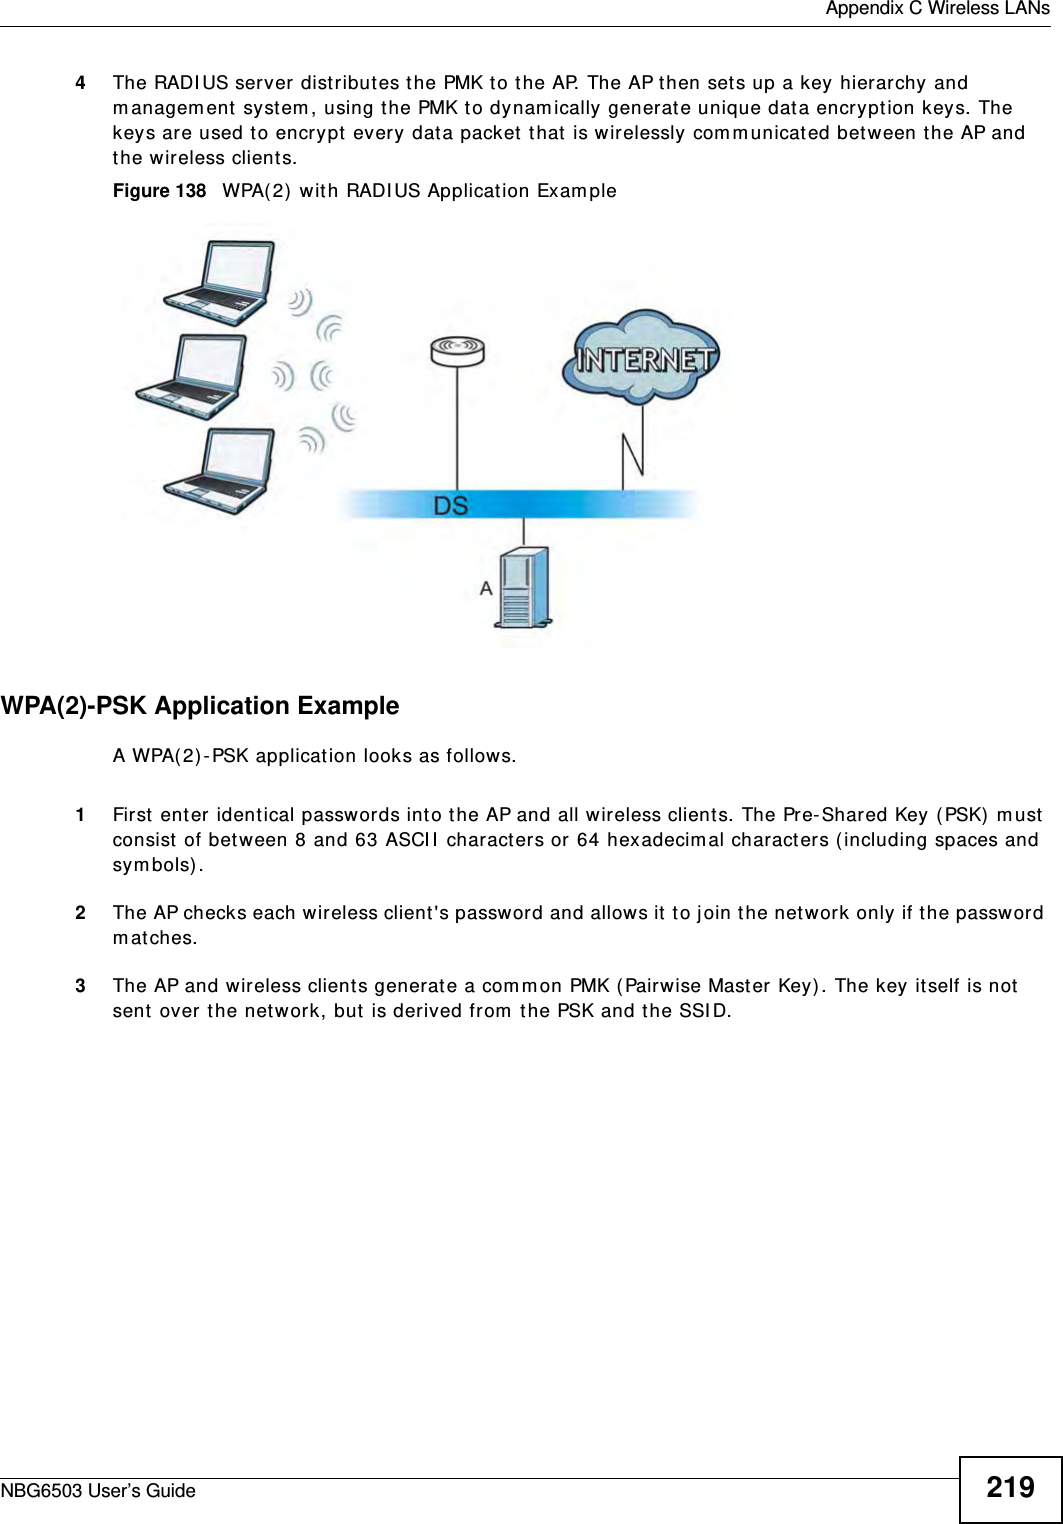  Appendix C Wireless LANsNBG6503 User’s Guide 2194The RADIUS server distributes the PMK to the AP. The AP then sets up a key hierarchy and management system, using the PMK to dynamically generate unique data encryption keys. The keys are used to encrypt every data packet that is wirelessly communicated between the AP and the wireless clients.Figure 138   WPA(2) with RADIUS Application ExampleWPA(2)-PSK Application ExampleA WPA(2)-PSK application looks as follows.1First enter identical passwords into the AP and all wireless clients. The Pre-Shared Key (PSK) must consist of between 8 and 63 ASCII characters or 64 hexadecimal characters (including spaces and symbols).2The AP checks each wireless client&apos;s password and allows it to join the network only if the password matches.3The AP and wireless clients generate a common PMK (Pairwise Master Key). The key itself is not sent over the network, but is derived from the PSK and the SSID. 